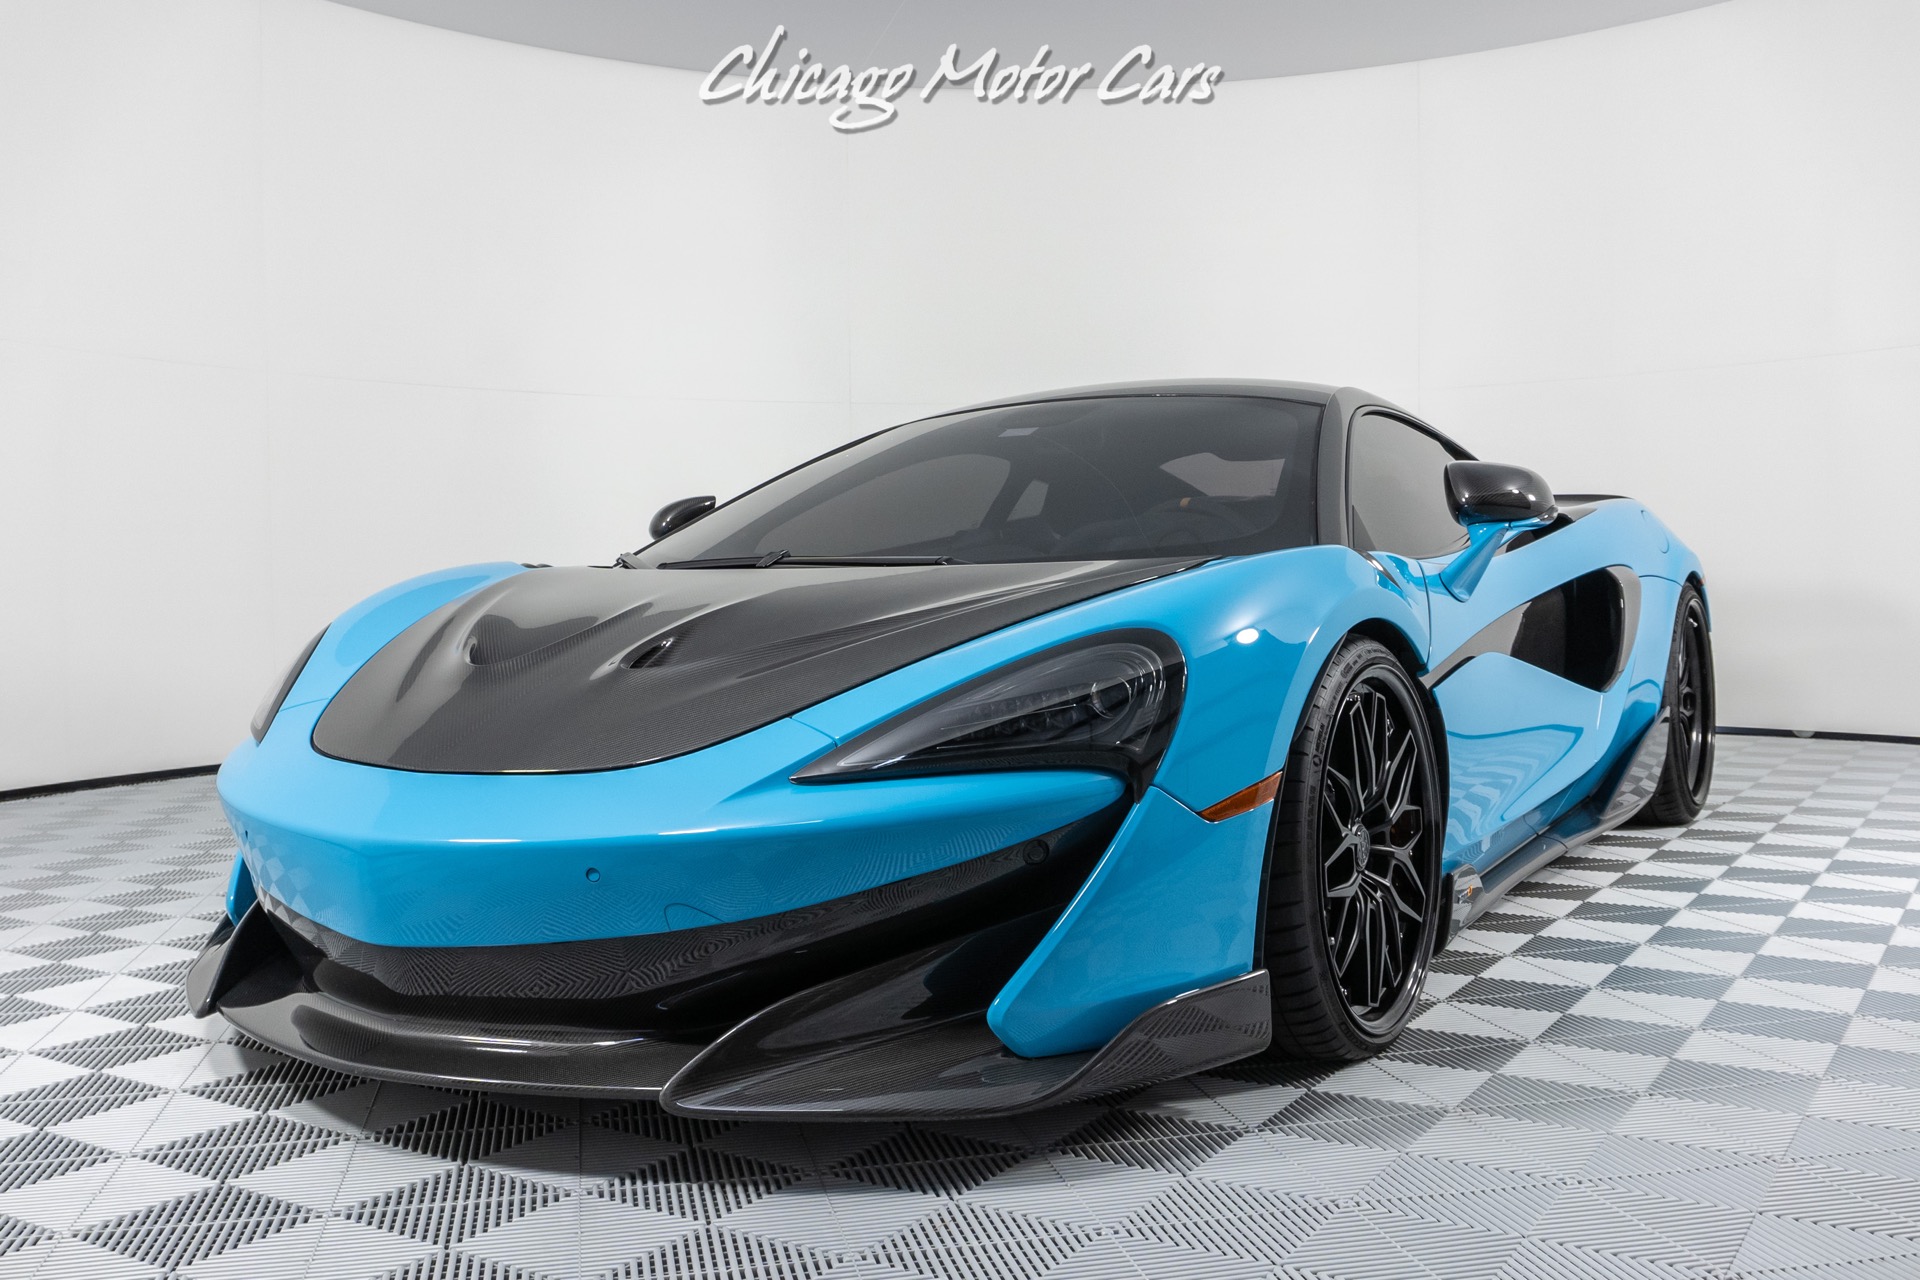 Used-2019-McLaren-600LT-COUPE-DME-STAGE-2-Fistral-Blue-Tons-of-Carbon-SENNA-Seats-320K-MSRP